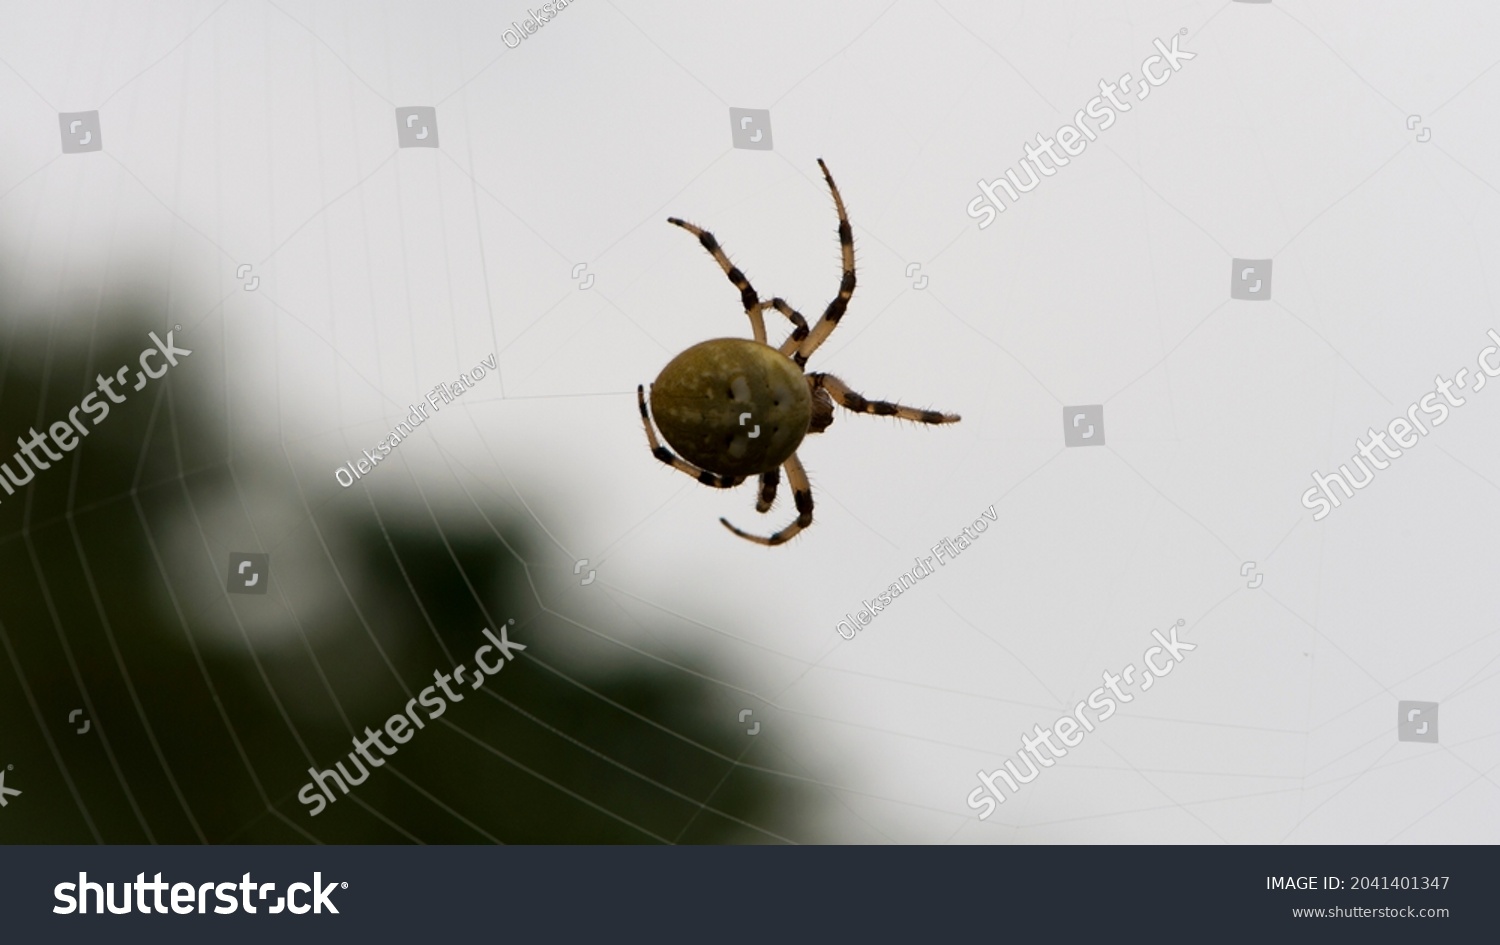 Araneus quadratus. a large cross spider sits in her spider's web and lurks for prey. spider on a web. macro nature. isolated on white. predator on the hunt. arthropod close-up. horror, halloween #2041401347